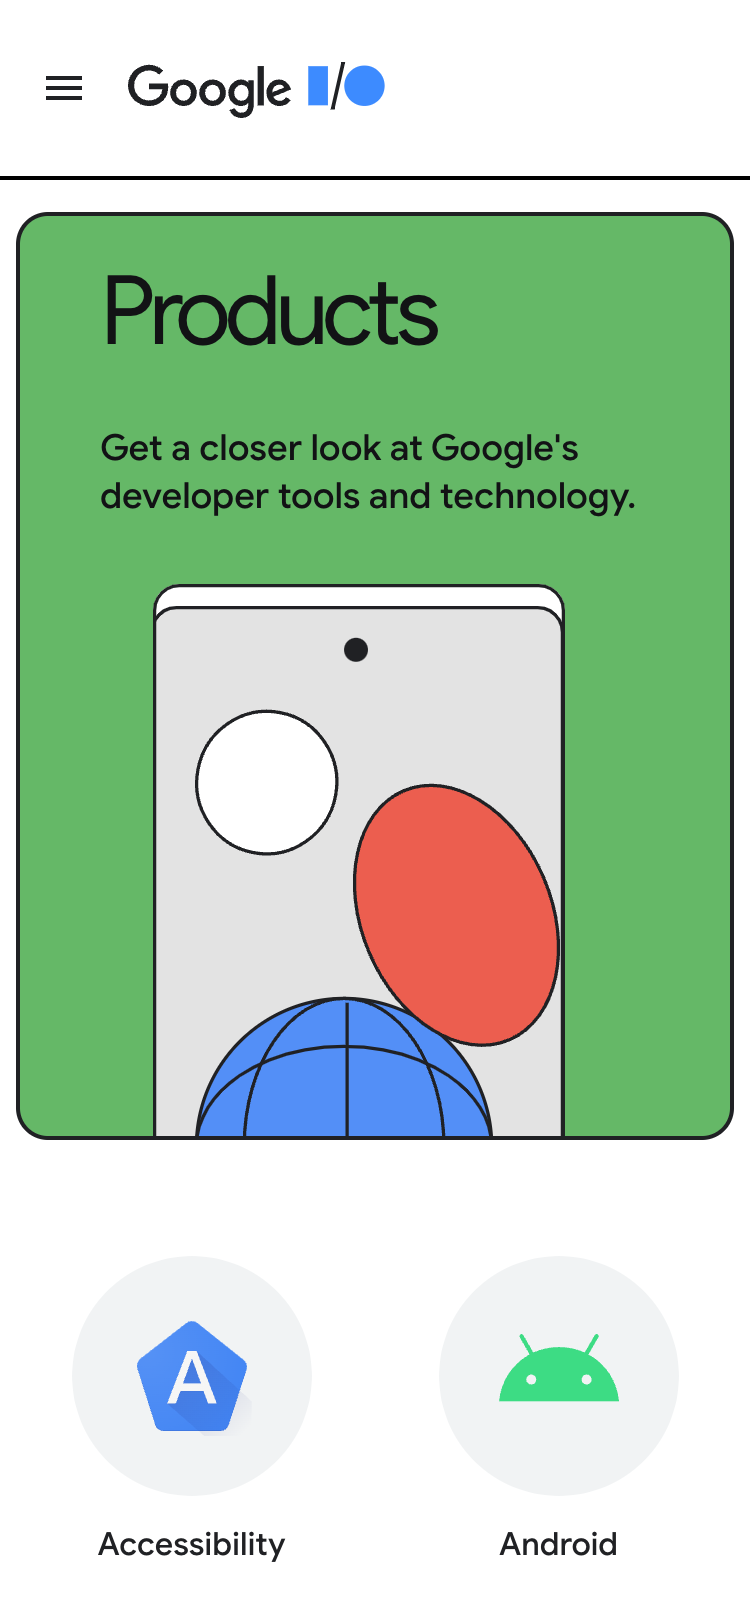 Mobile screenshot of the Google I/O 2022 'Products' page. The header contains the Google I/O logo and a menu button. The hero contains a short introduction paragraph and an illustration of a mobile phone. Below is a list of products with icons, starting with 'Accessibility' and 'Android'.